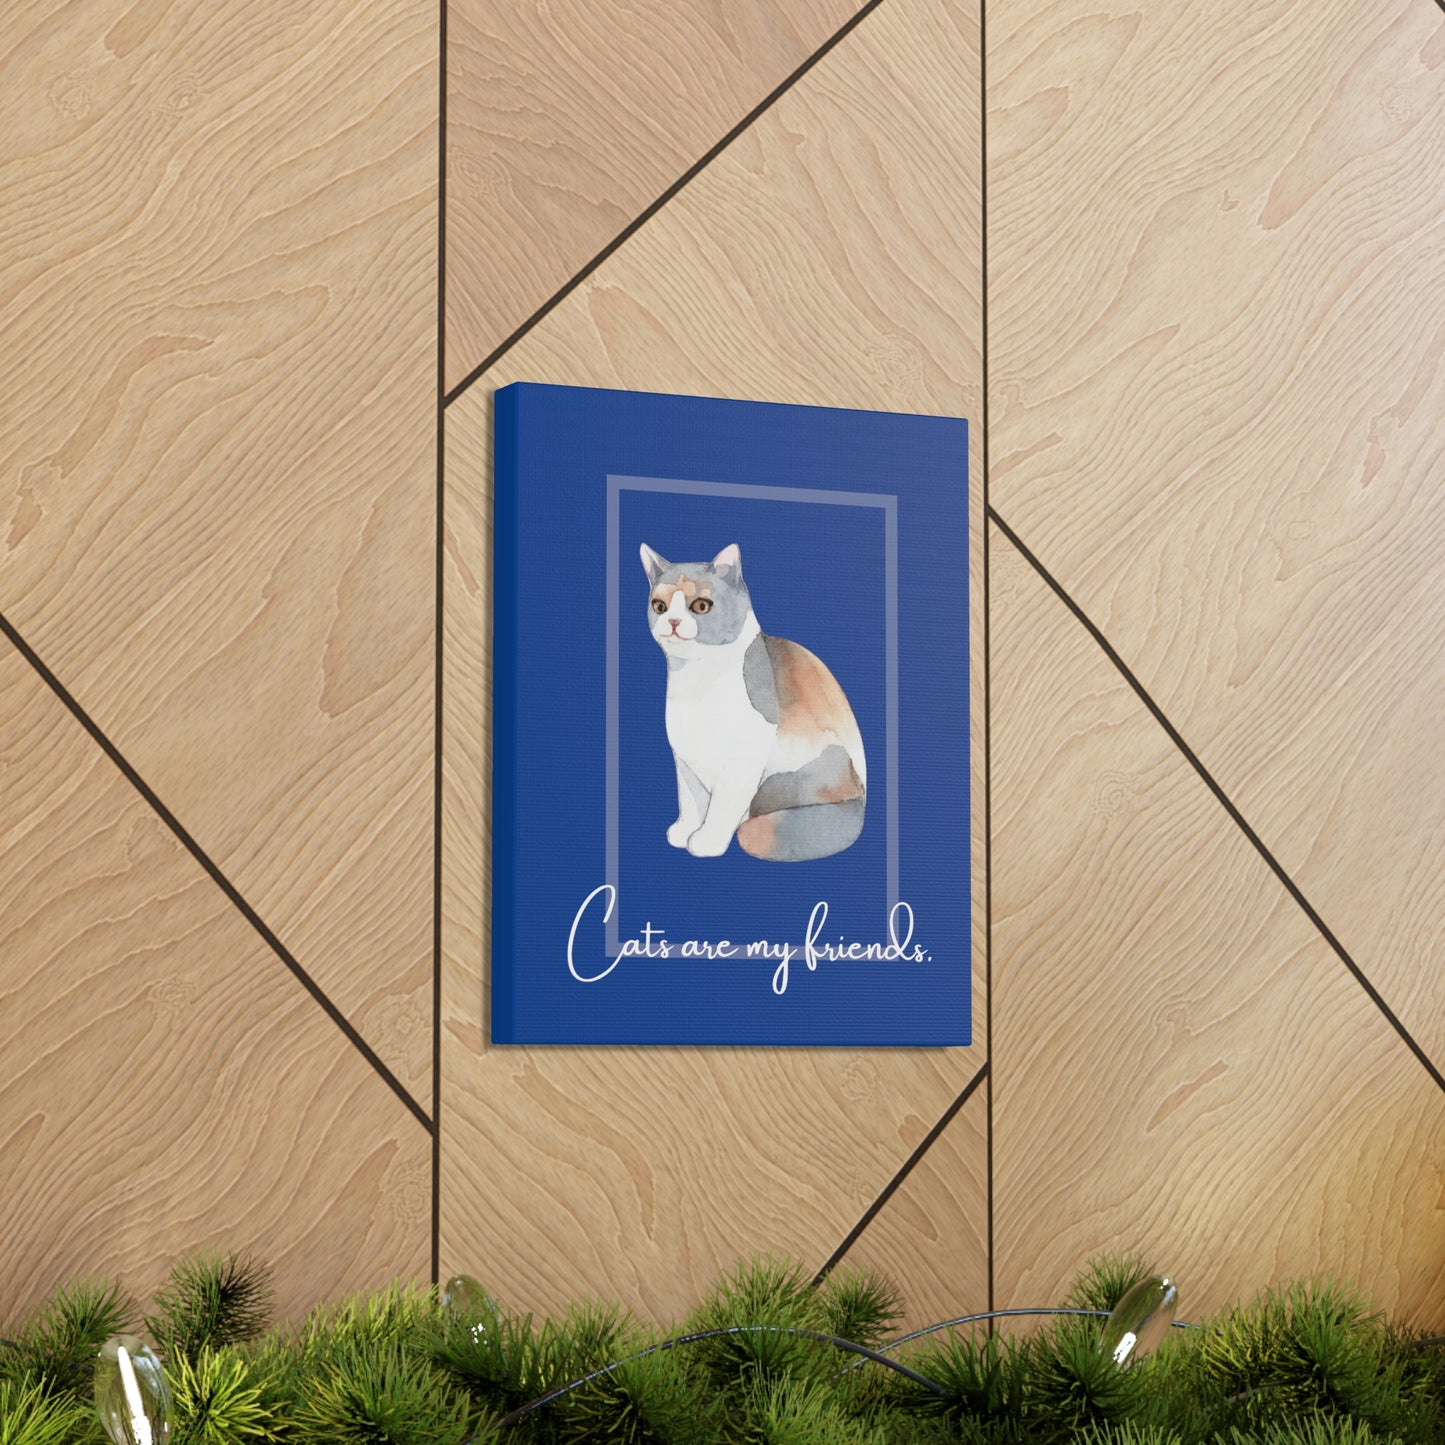 Cats are my friends. design (Dark Blue) Canvas Gallery Wraps poster